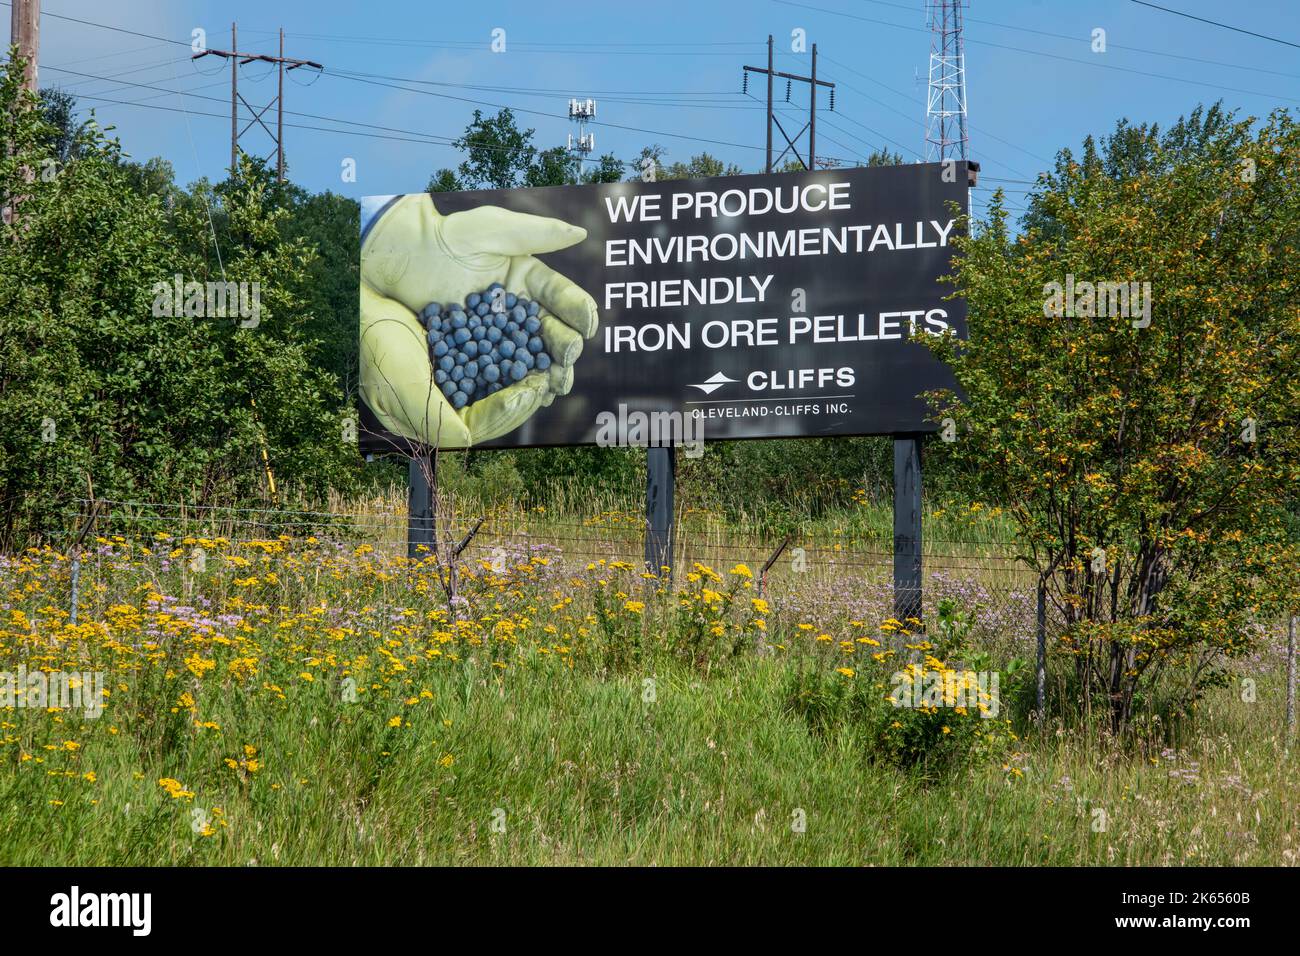 Silver Bay, Minnesota.  Cleveland-Cliffs Northshore Mining saying their iron ore pellets are environmentally friendly on a billboard ad. Stock Photo